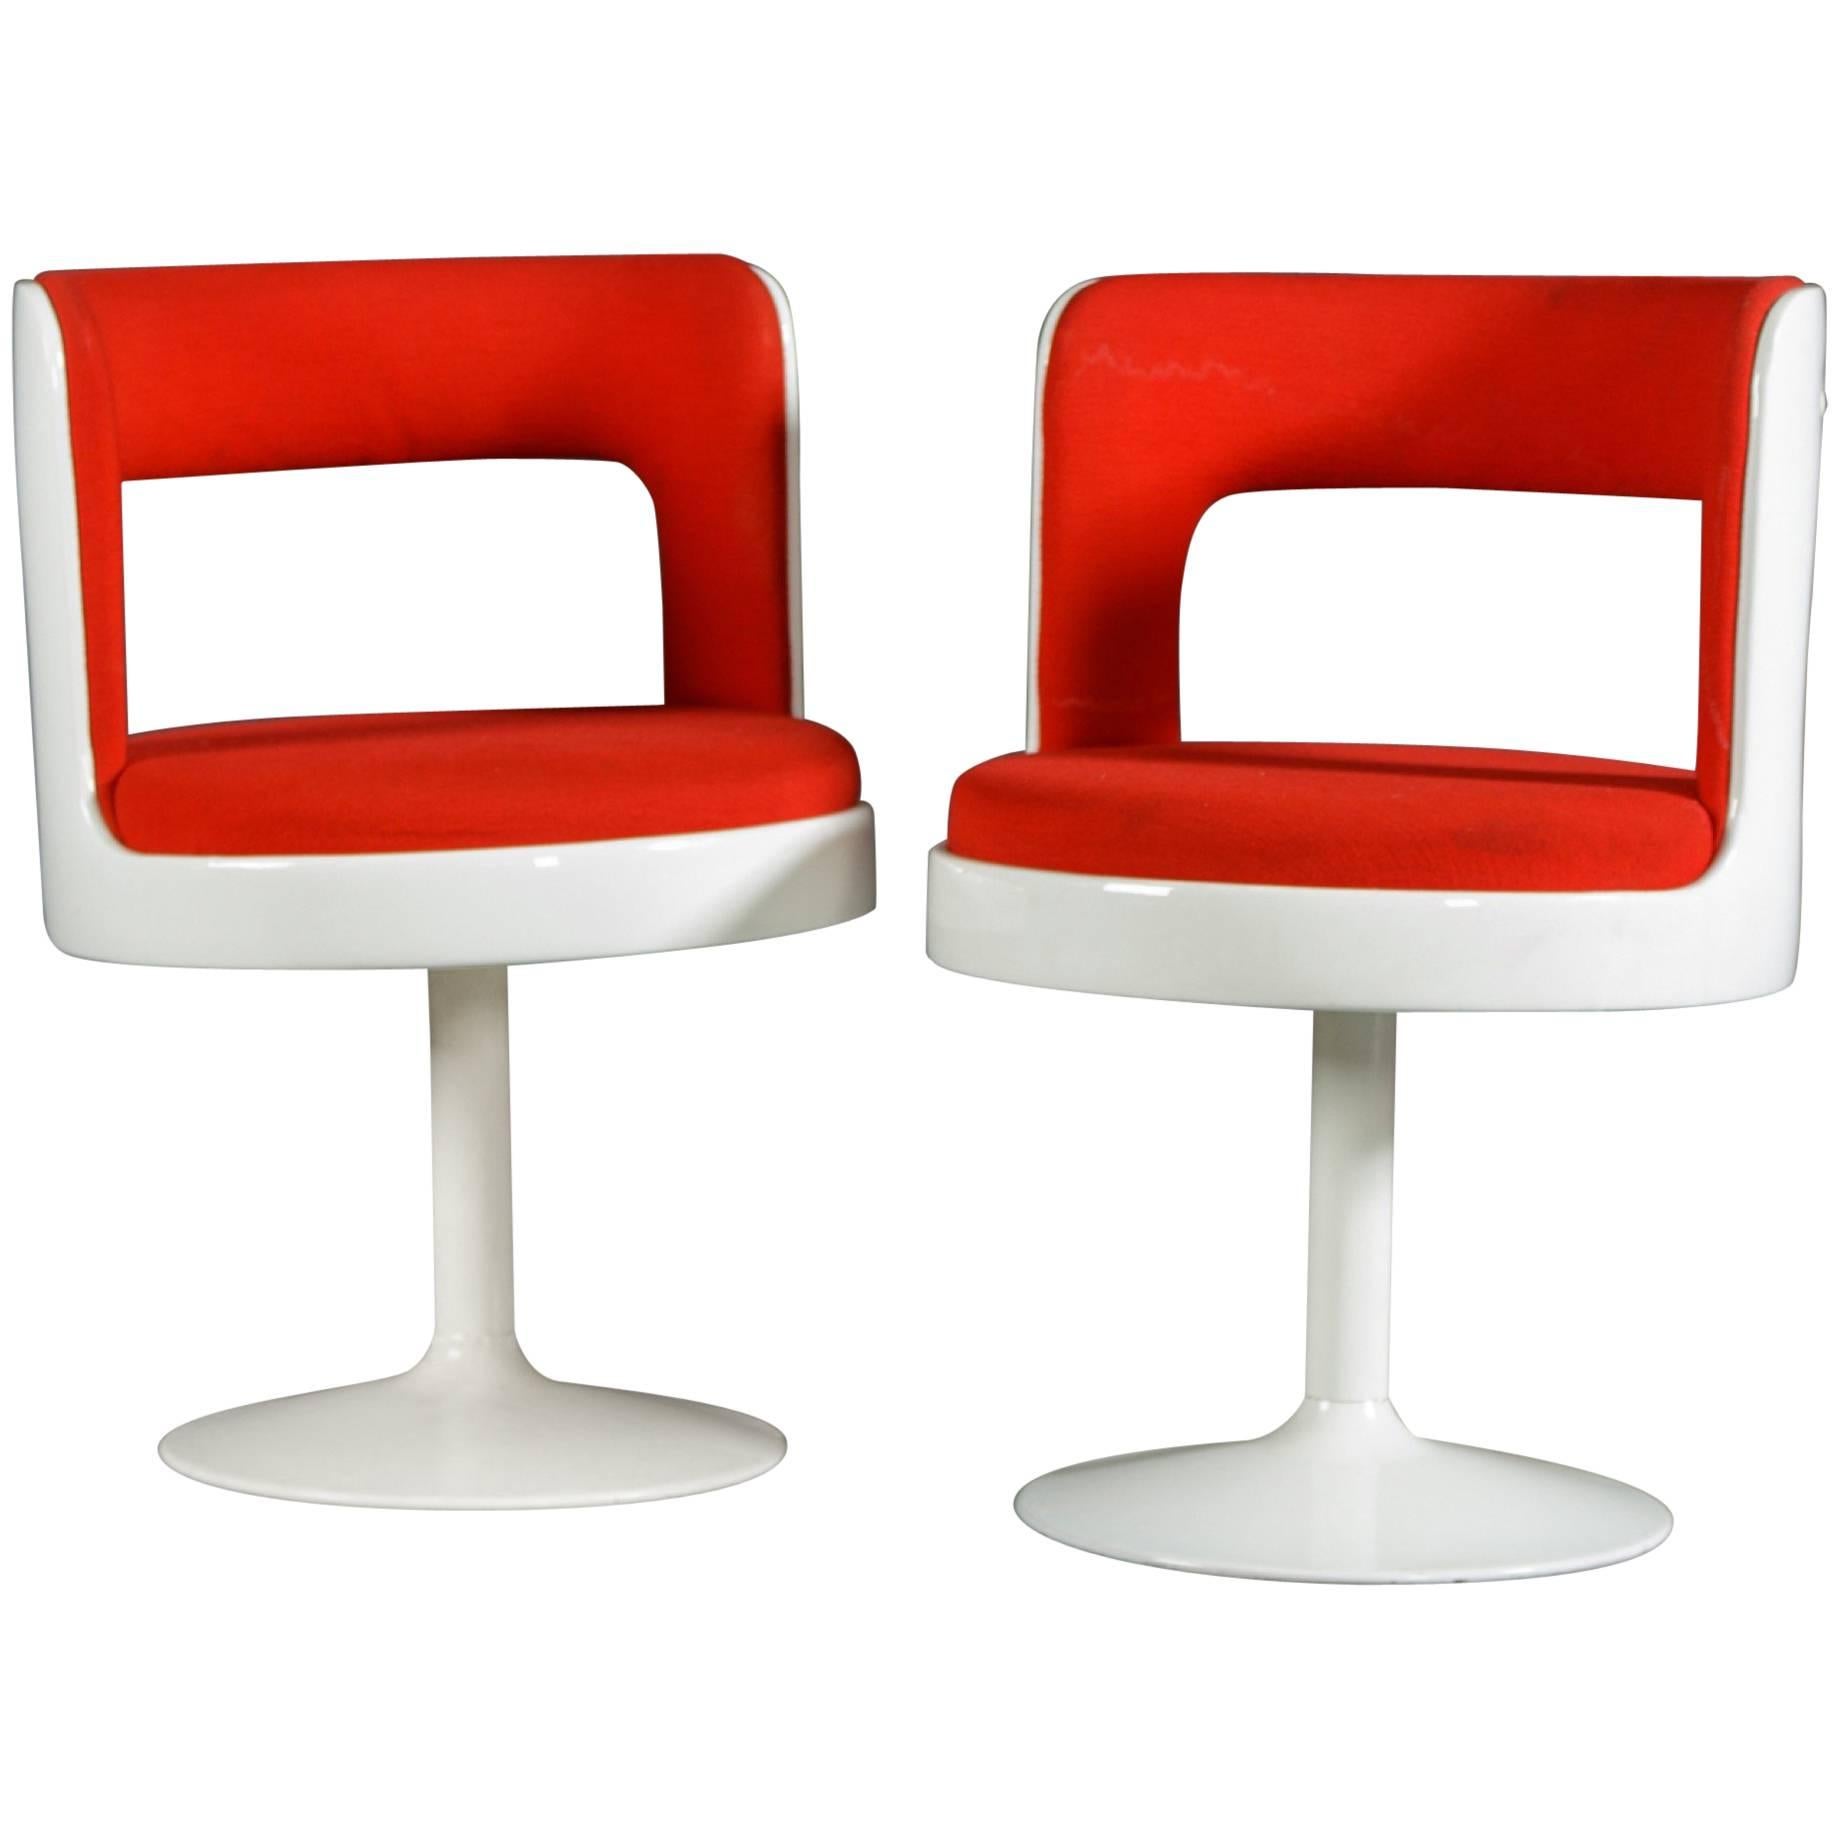 Two Mid-Century Modern 1970s Easy Chairs from Finland